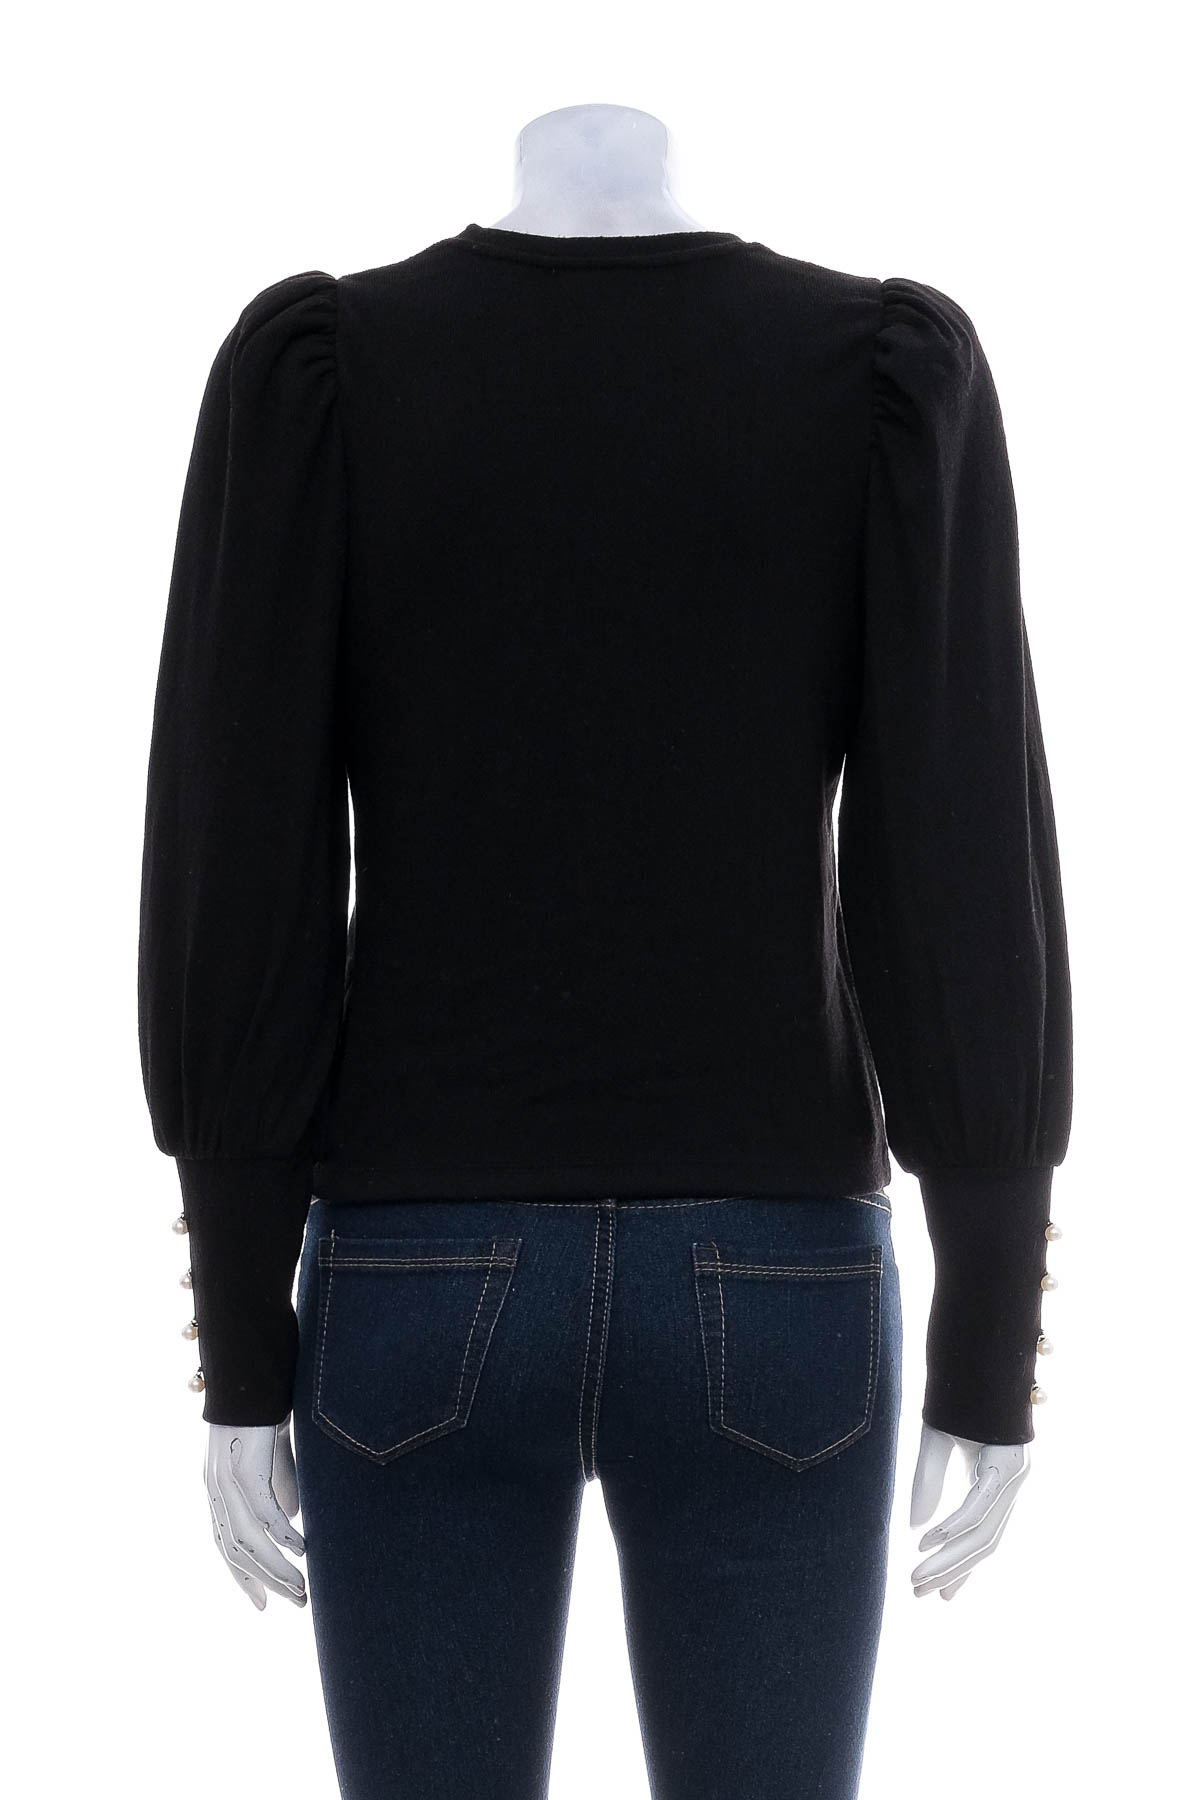 Women's sweater - ONLY - 1